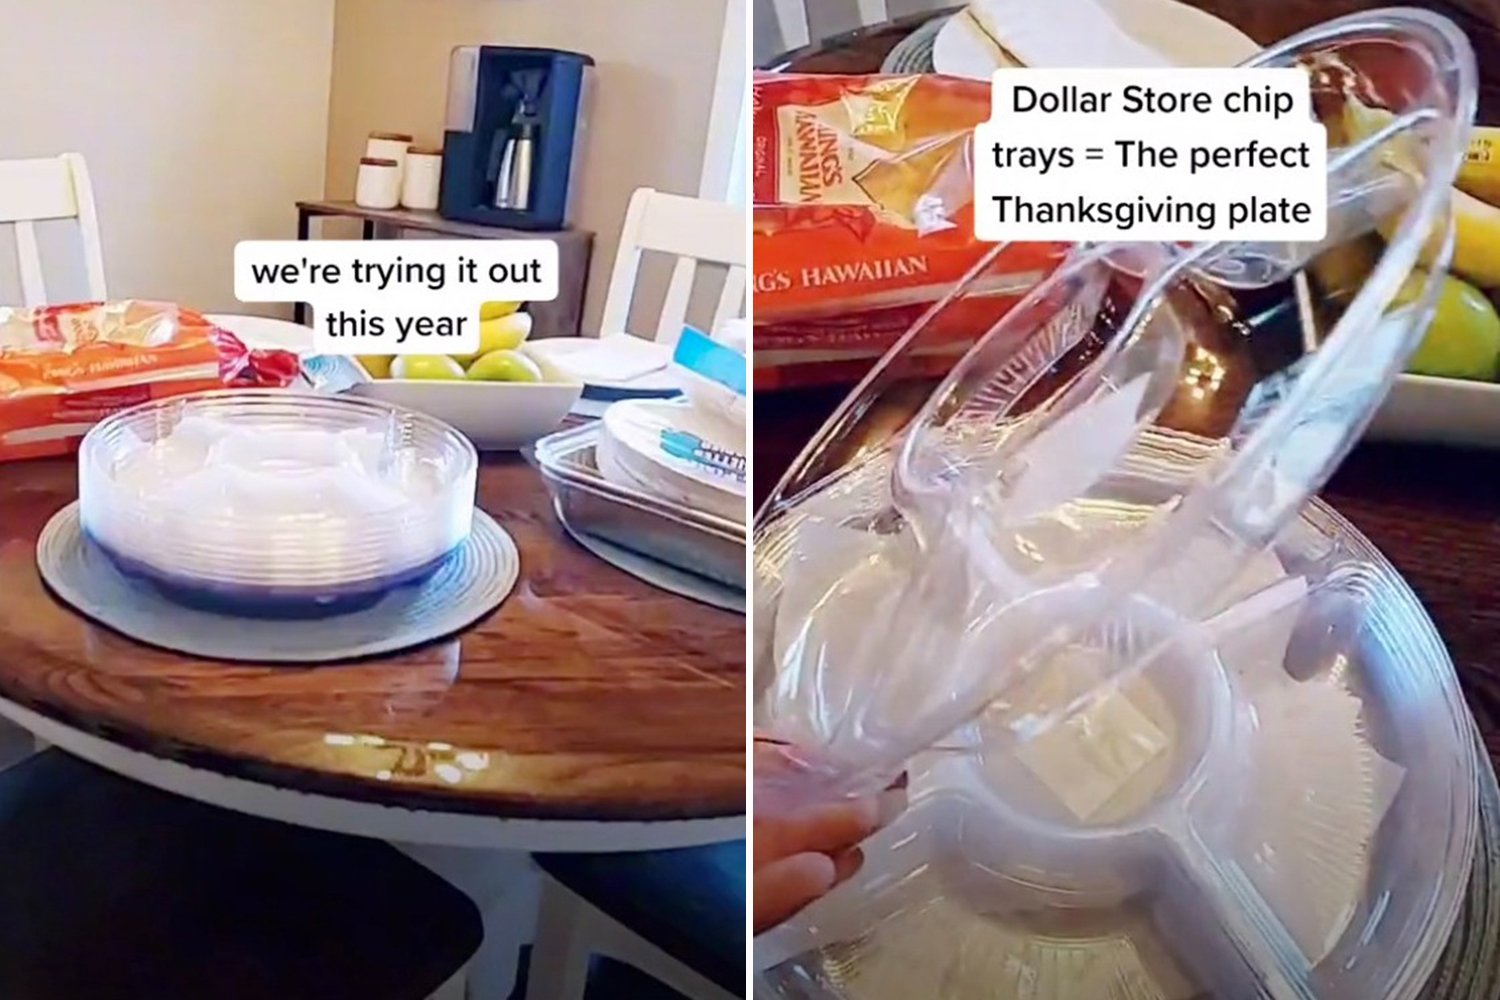 Woman uses party tray to serve Thanksgiving meal - everyone is saying same thing